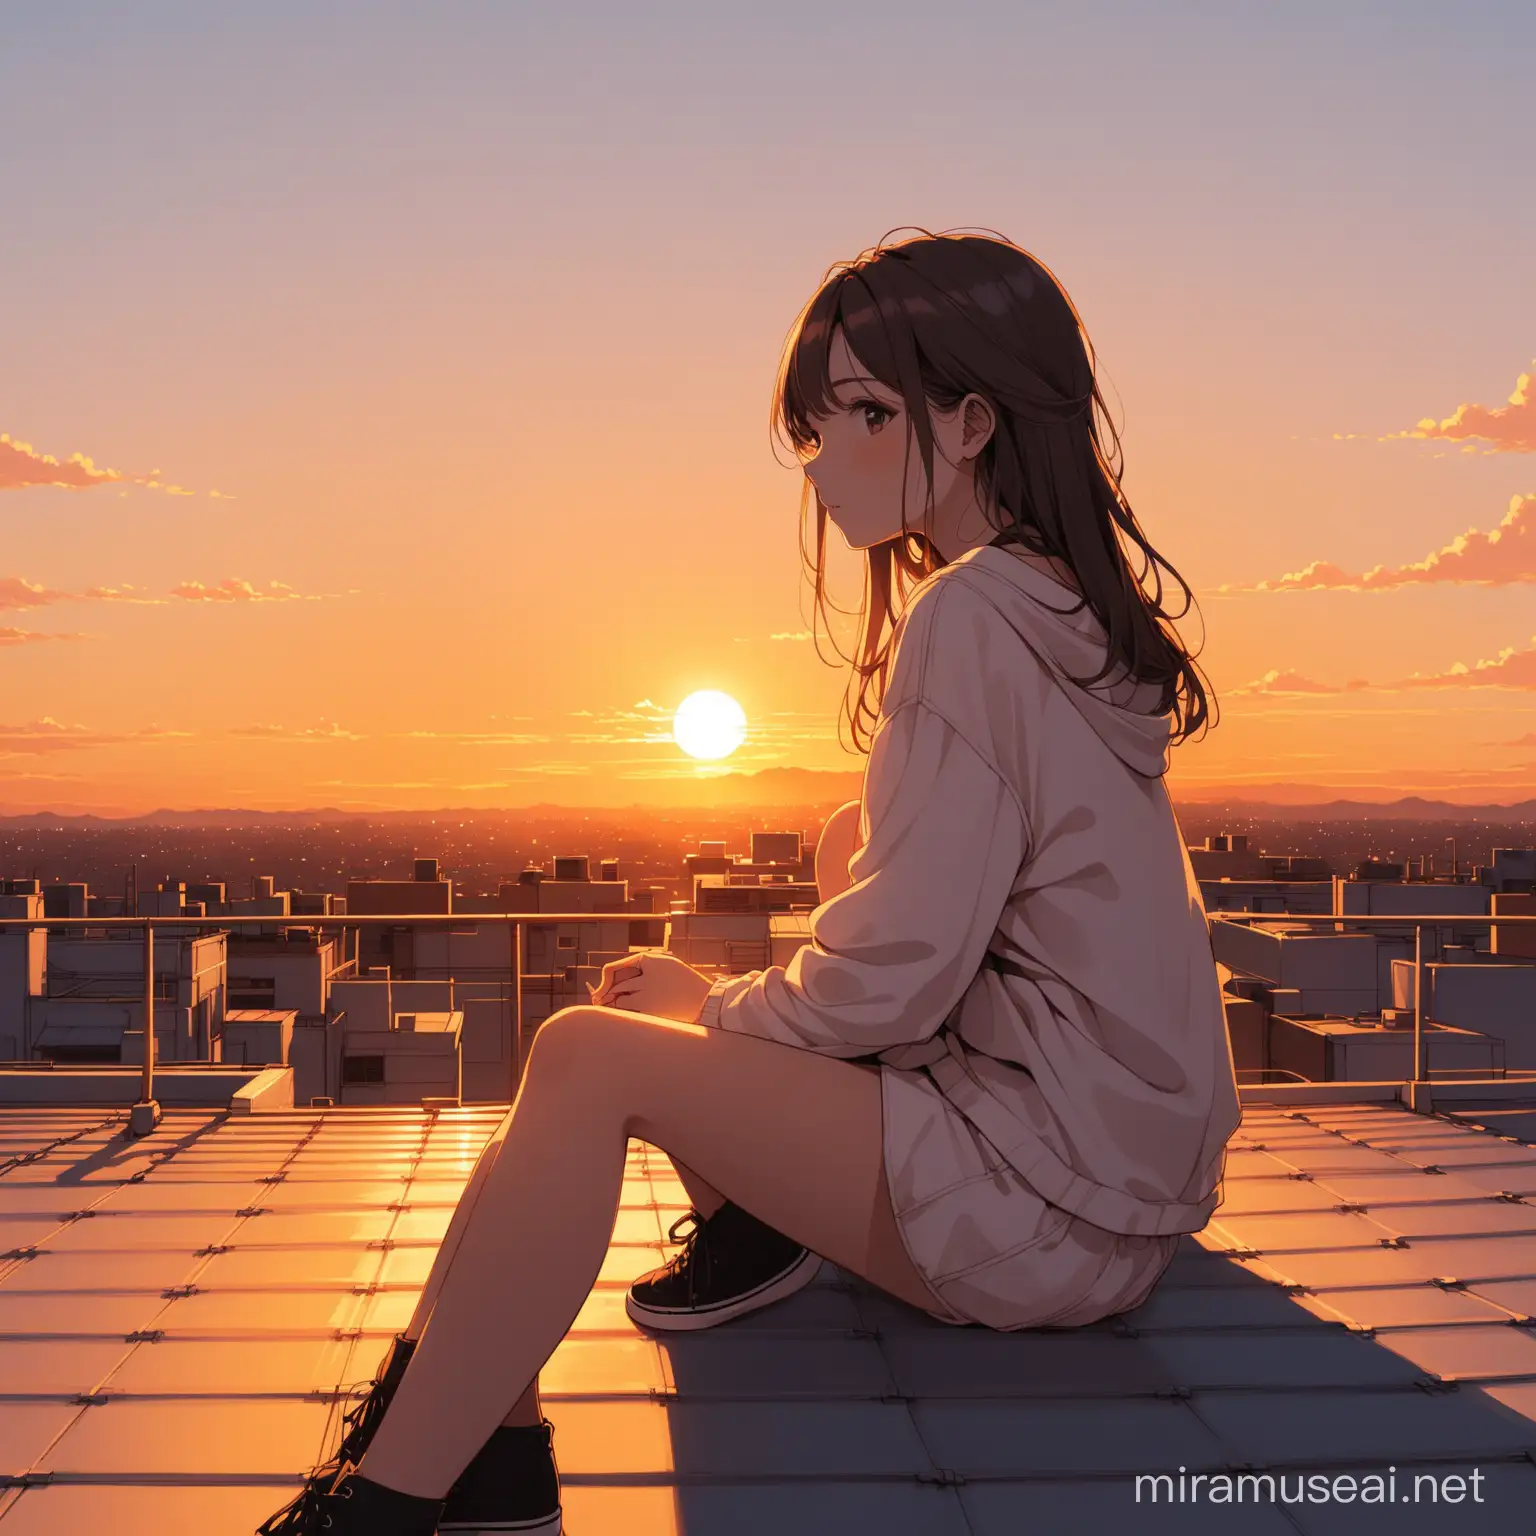 Aesthetic young girl seating on rooftop, sunset